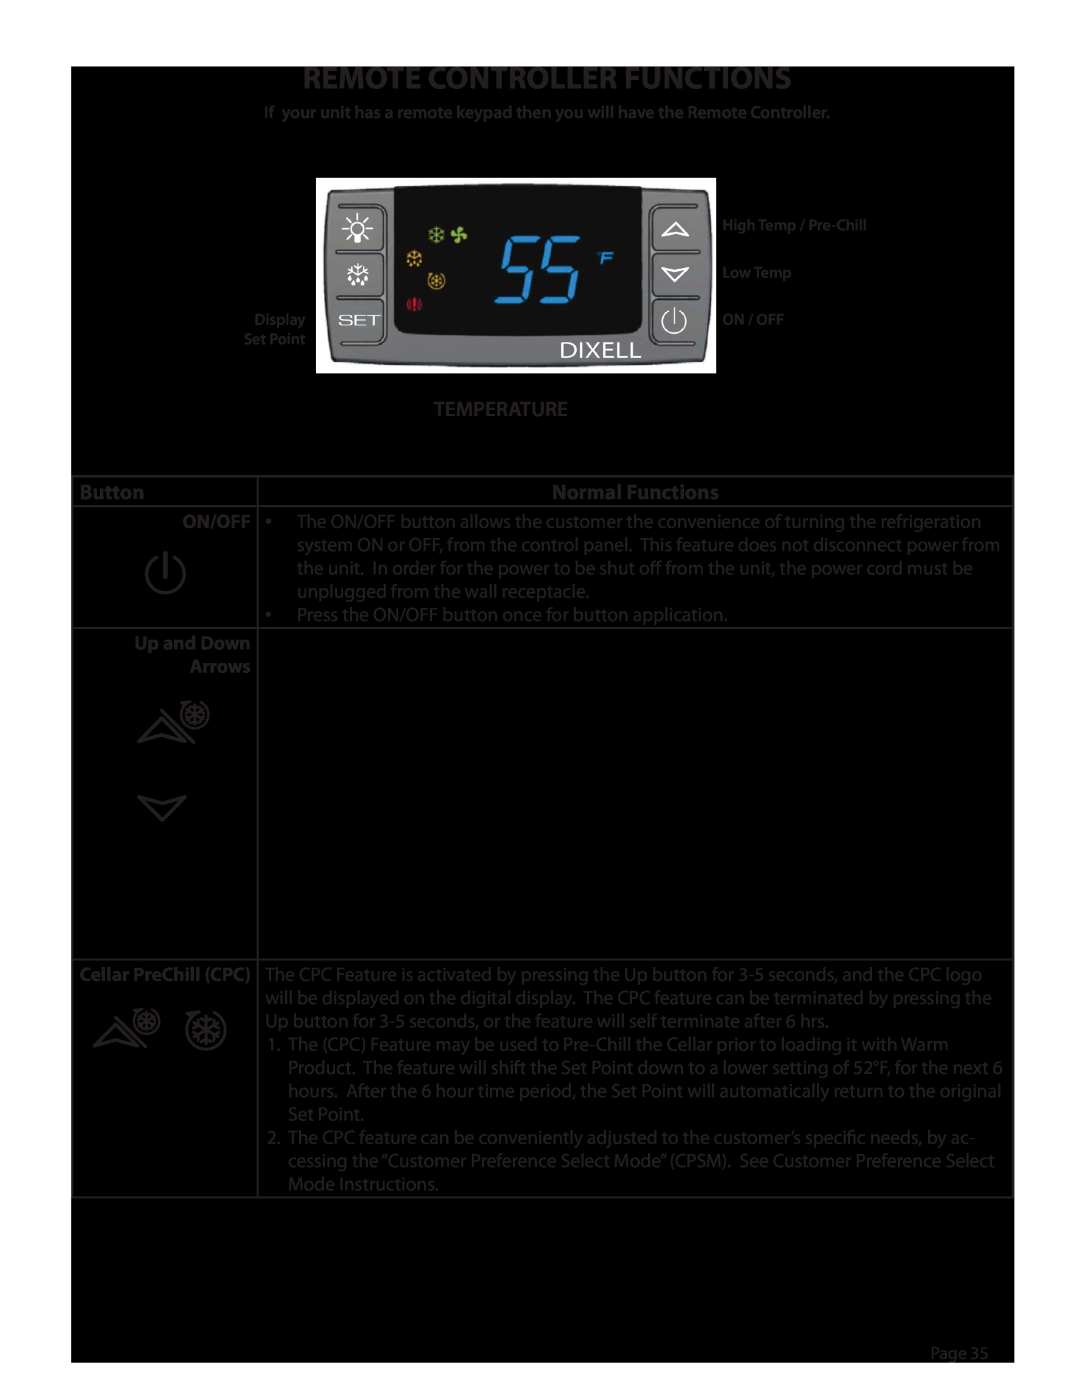 WhisperKool 5000 Remote Controller Functions, Temperature, Button, Normal Functions, High Temp / Pre-Chill, Display 